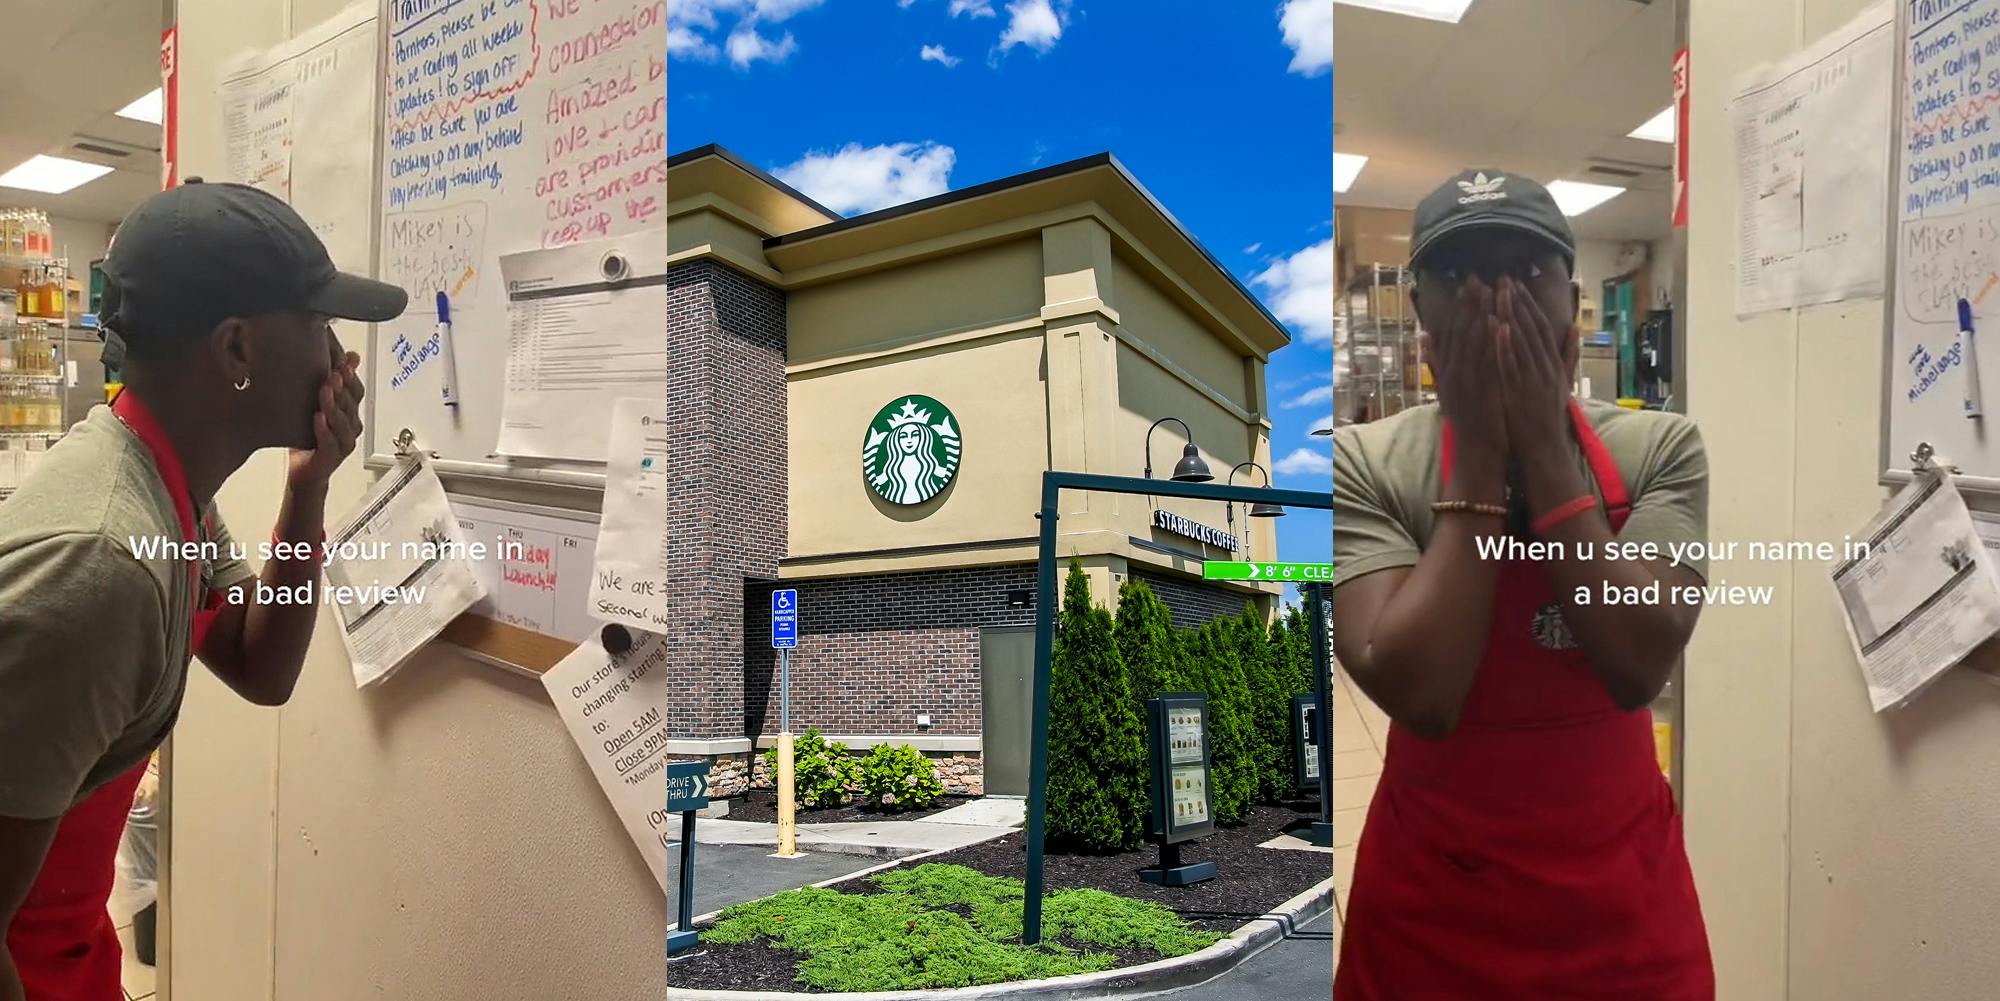 Starbucks barista with hand on mouth looking at whiteboard caption "When u see your name in a bad review" (l) Starbucks building with sign and drive thru (c) Starbucks barista looking at camera with hands on mouth caption "When u see your name in a bad review" (r)